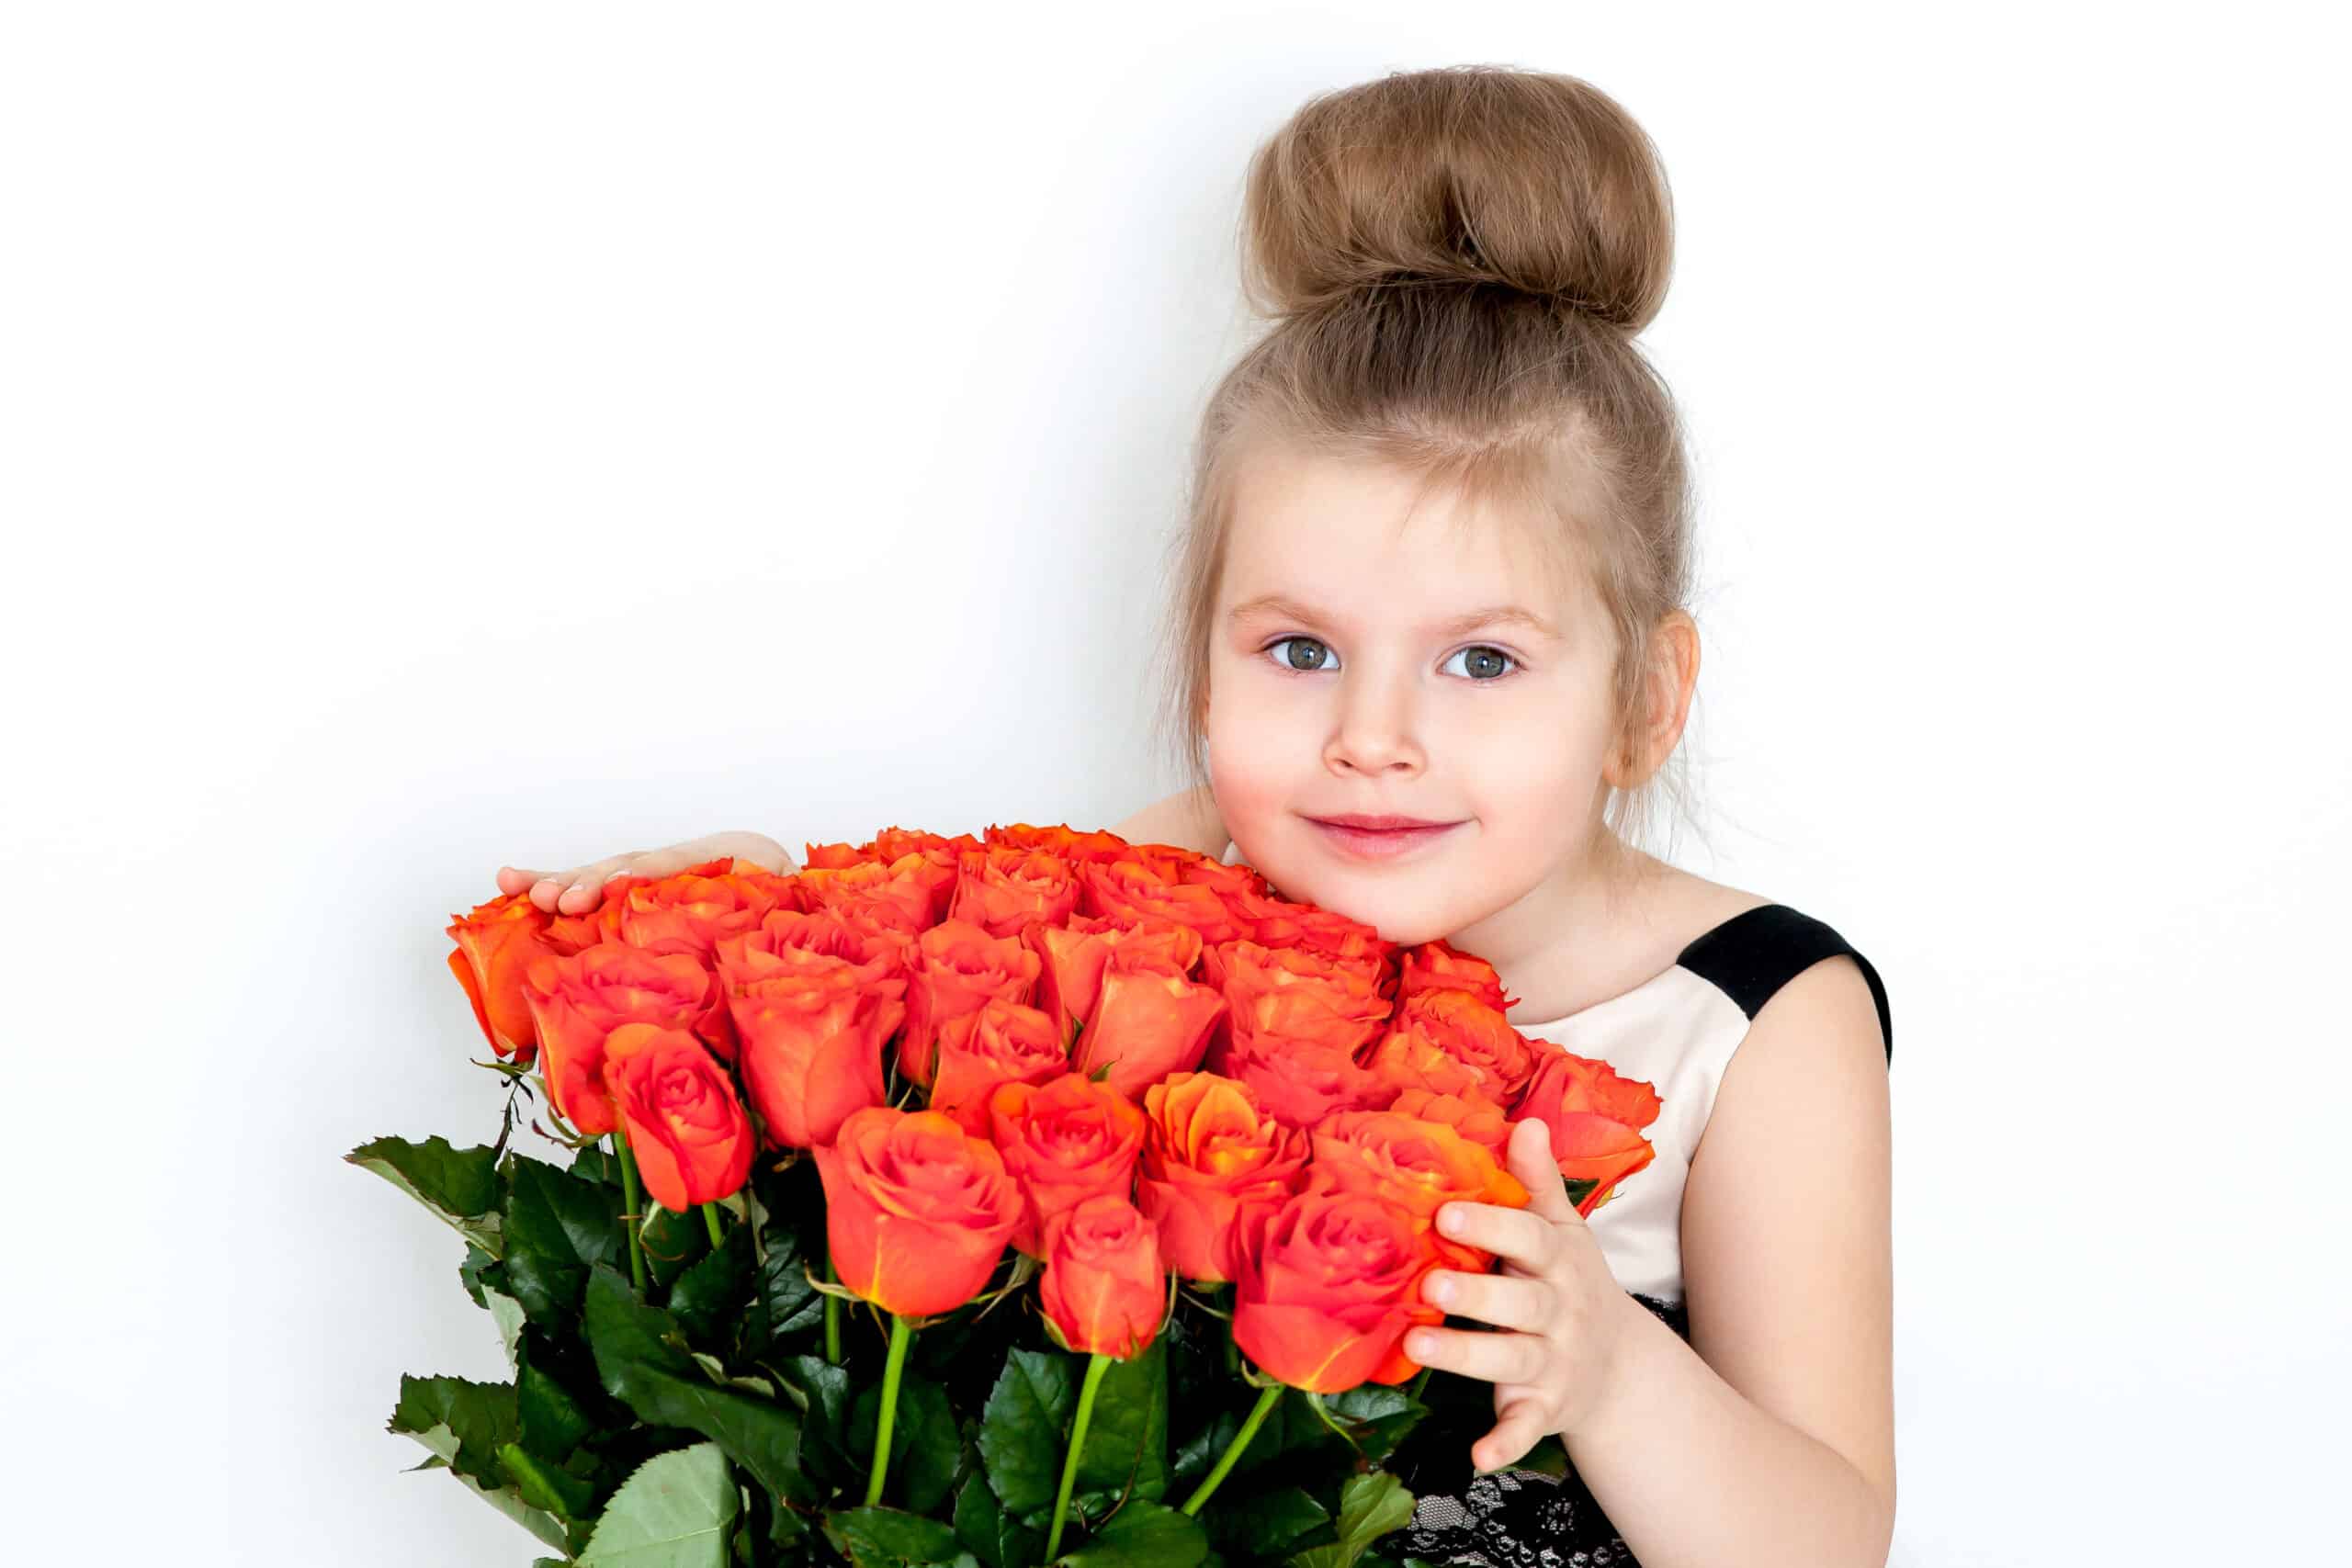 The little girl in an elegant dress with a bouquet of 51 orange roses